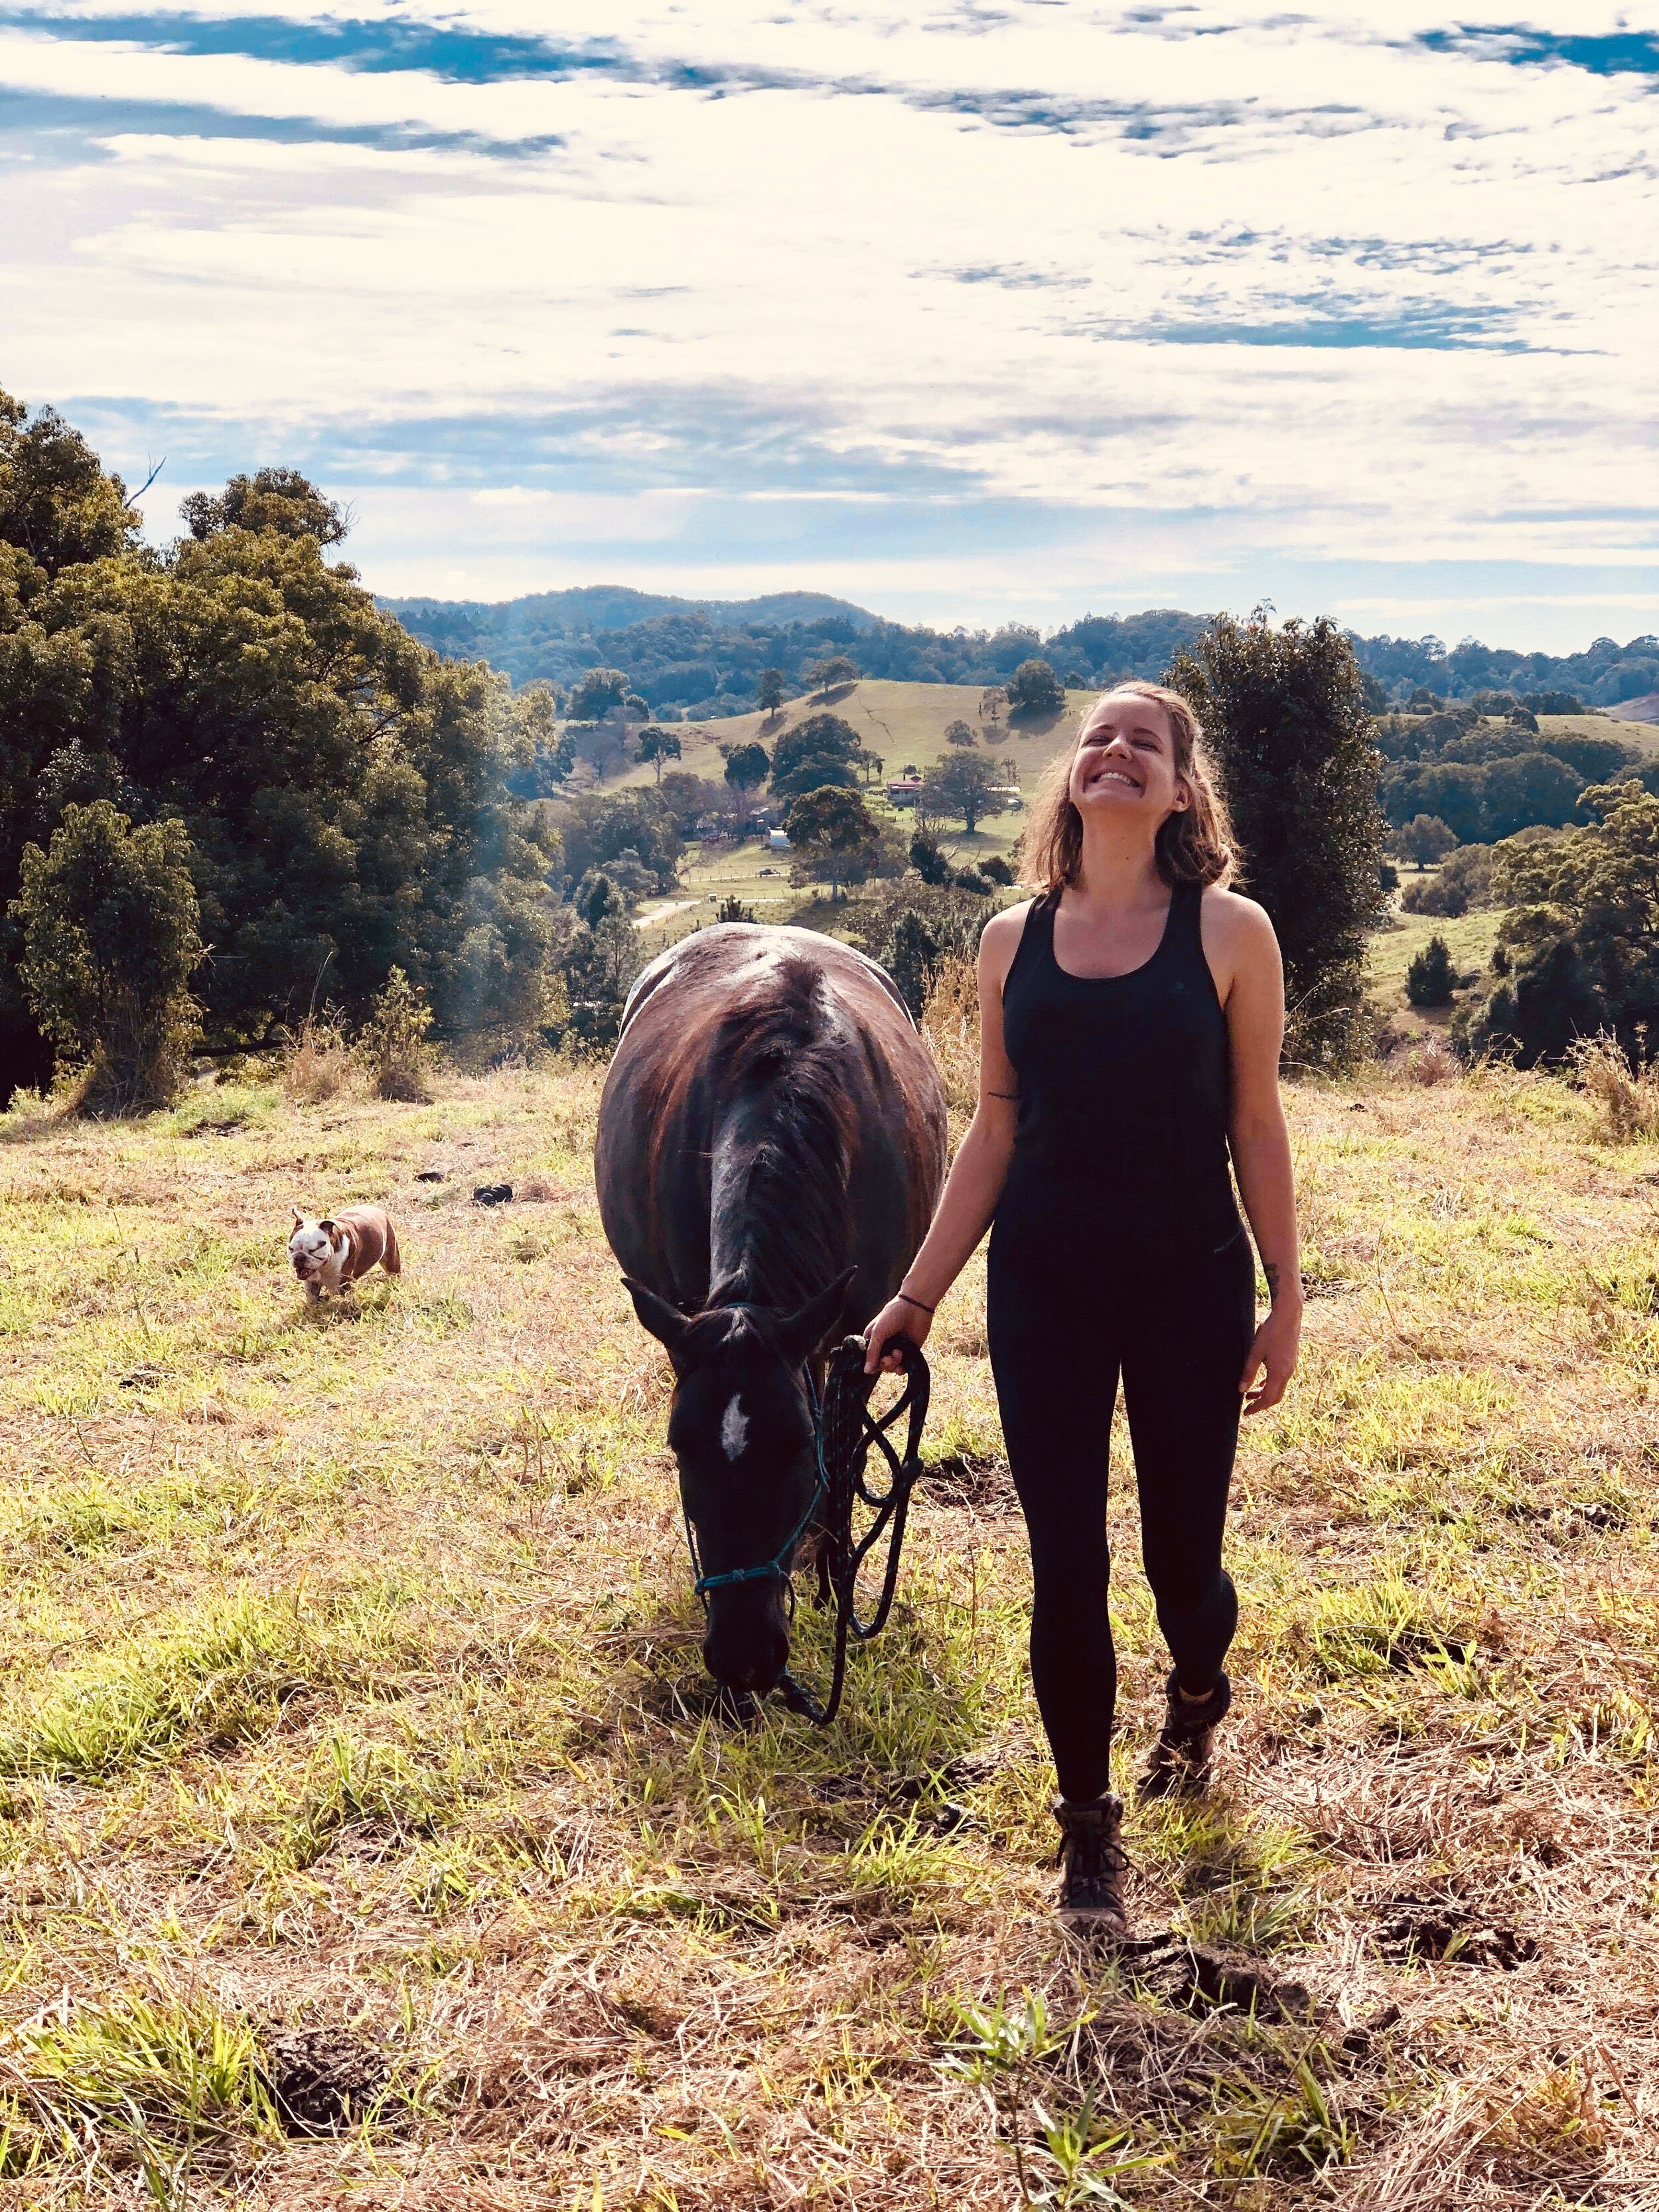 Breathwork meditation cacao ceremony mindfulness Love Connection loving kindness woman’s circle sacred sisters one with nature conscious Connections horse lover nature lover 22134.JPG